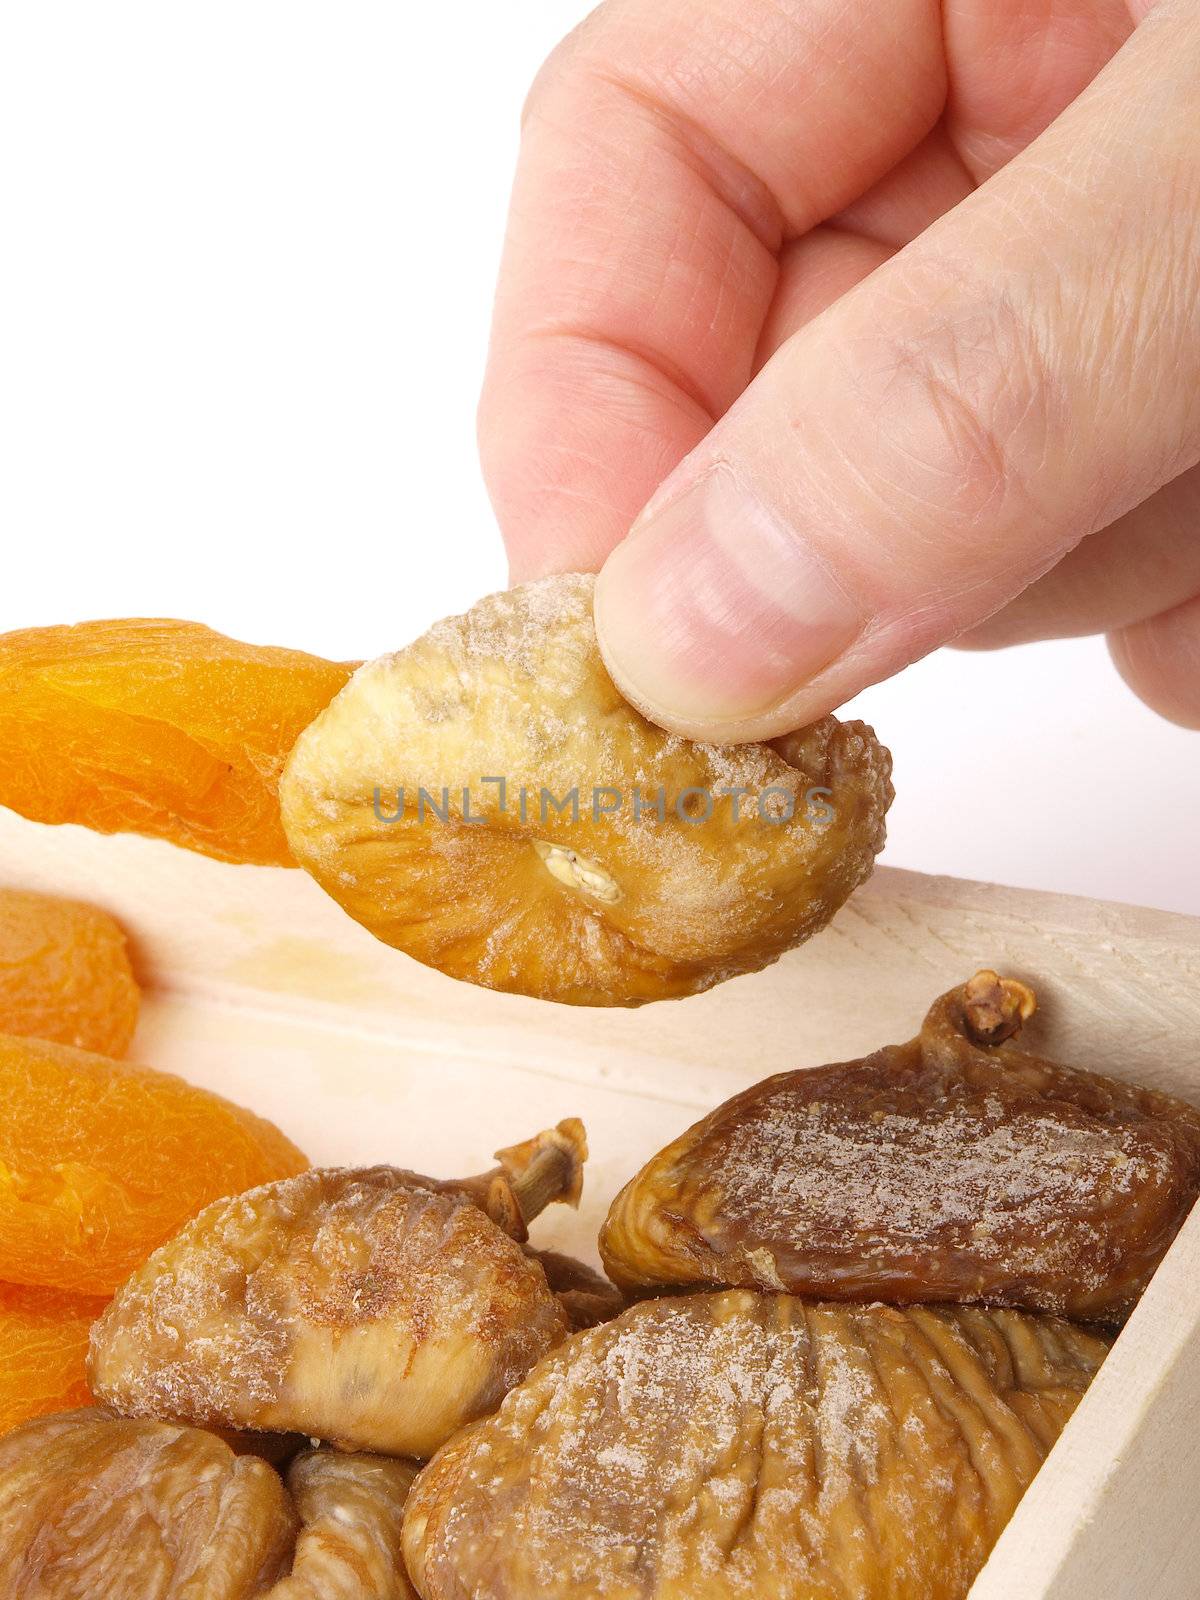 Hand taking a dried fruit